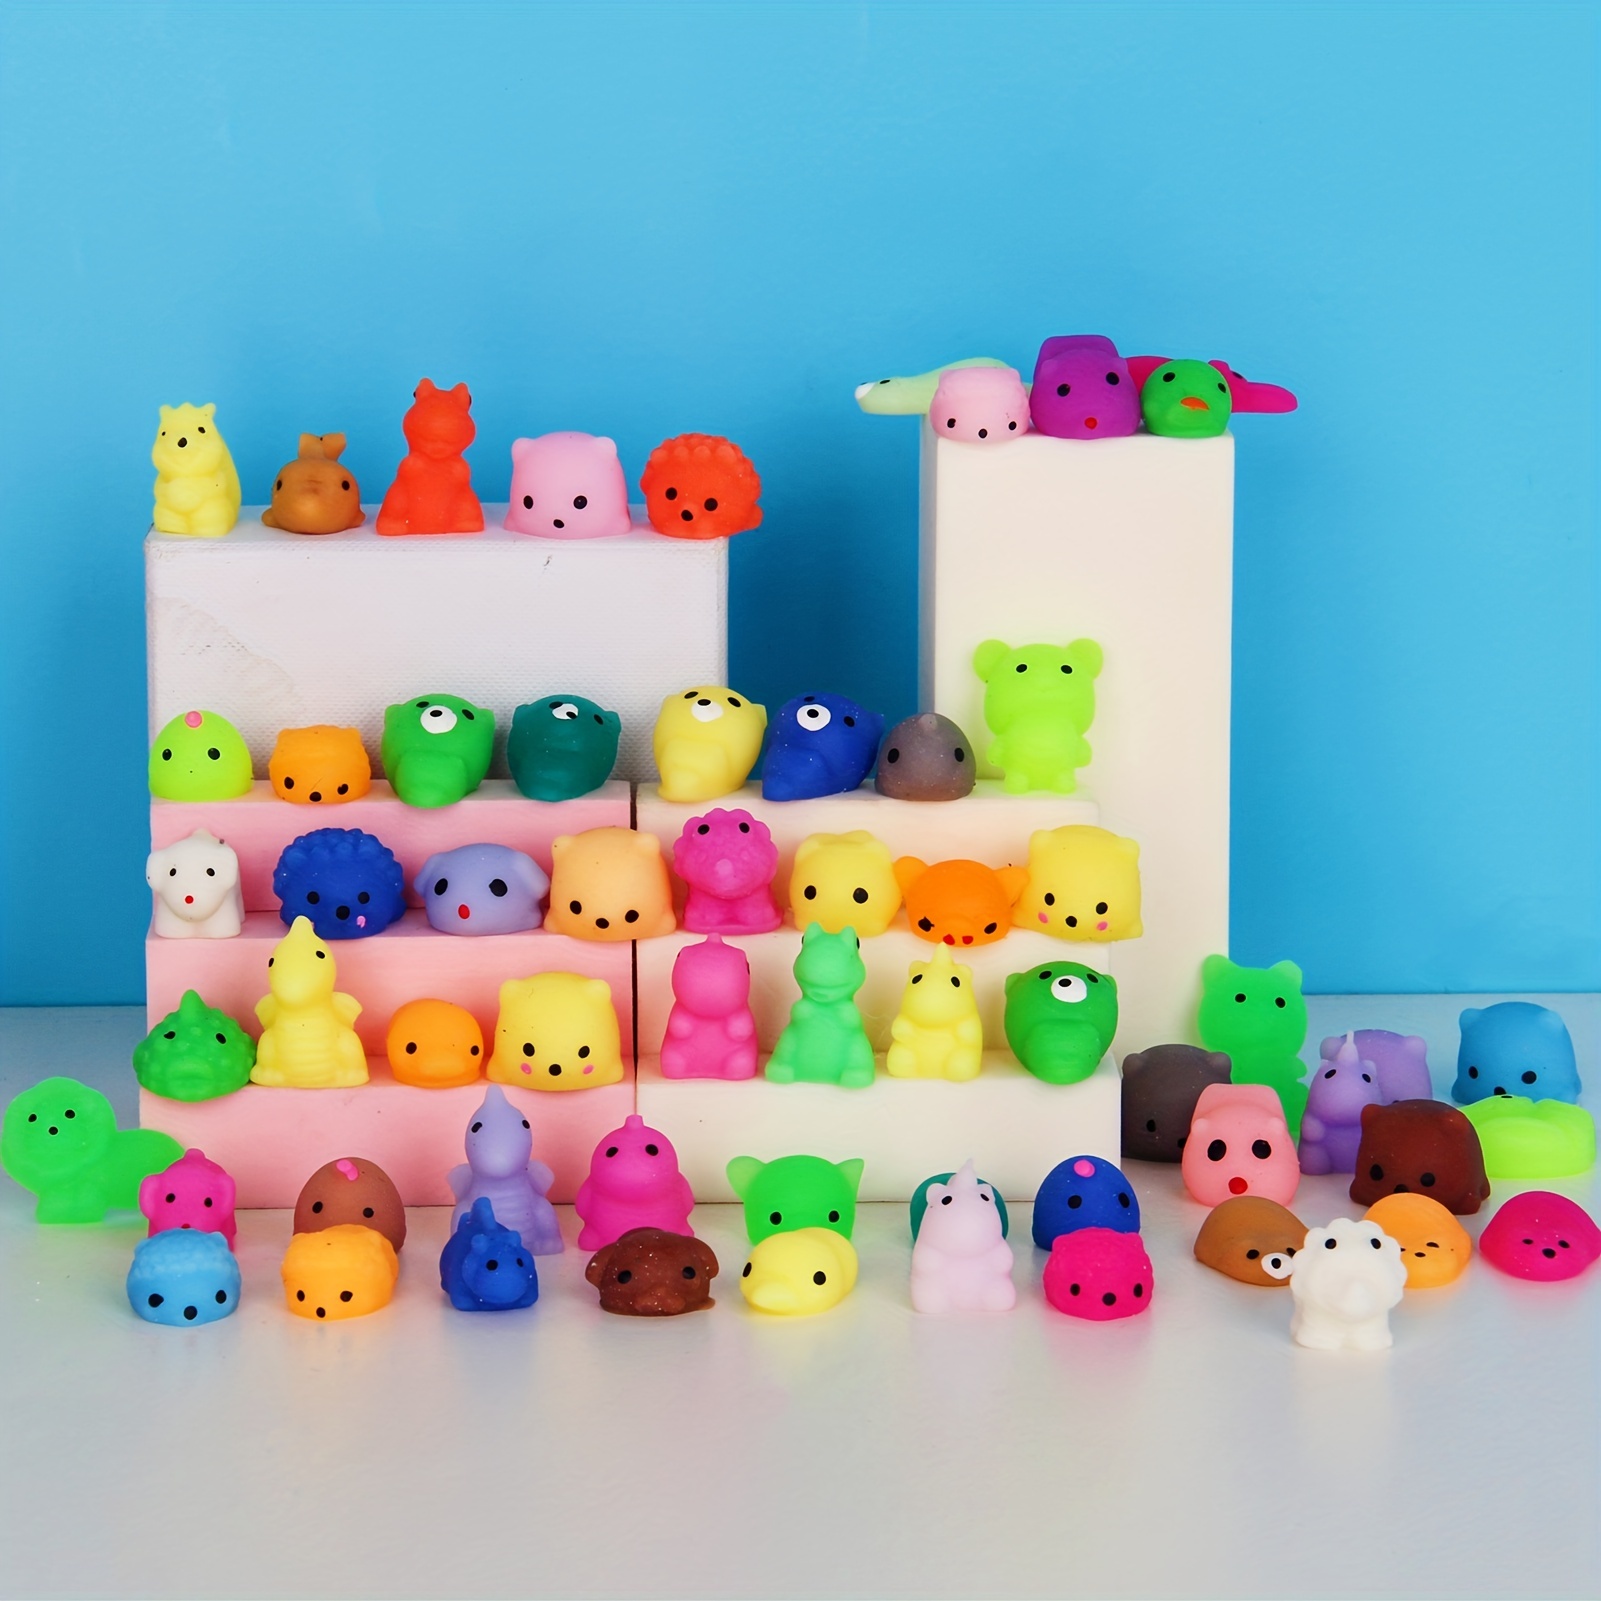 72Pcs Squishies Mochi Squishy Toys - Kawaii Mini Squishy Animals,Cute  Stress Relief Squishy Toy Pack for Boys & Girls, Cool Party Favors,  Classroom Prize, Birthday Gifts with Storage Box